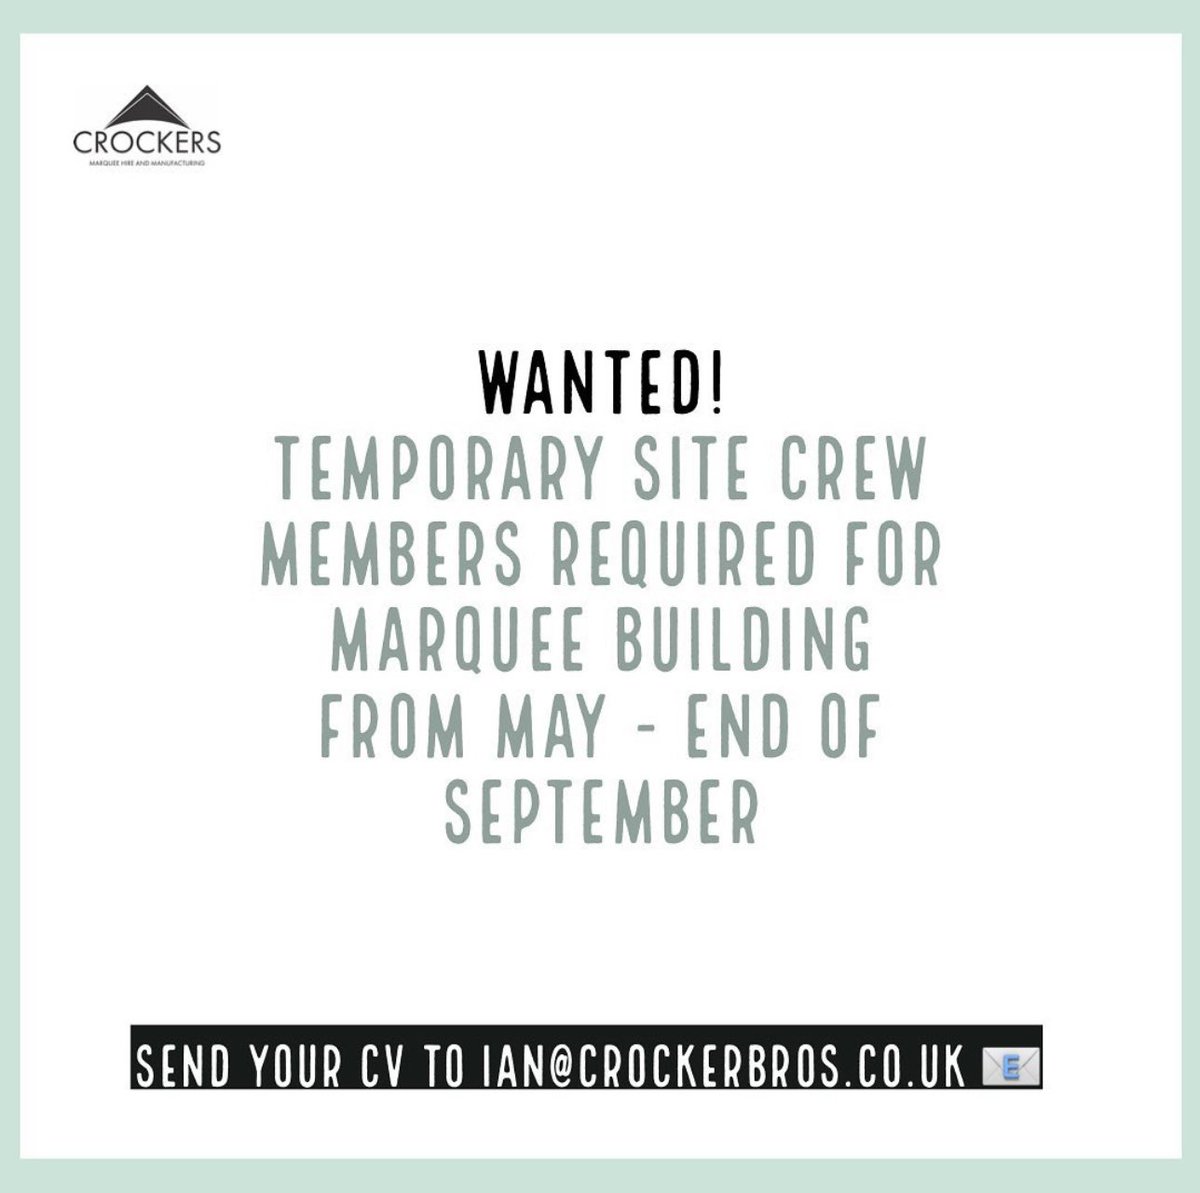 If you’re hard working, love working outdoors, like to keep fit, enjoy travelling around the UK, and thrive being part of a team - then this is the job for you!

Both novice and experienced marquee erectors should apply.

#Staffwanted #JobVacancy #Derby #Derbyshire